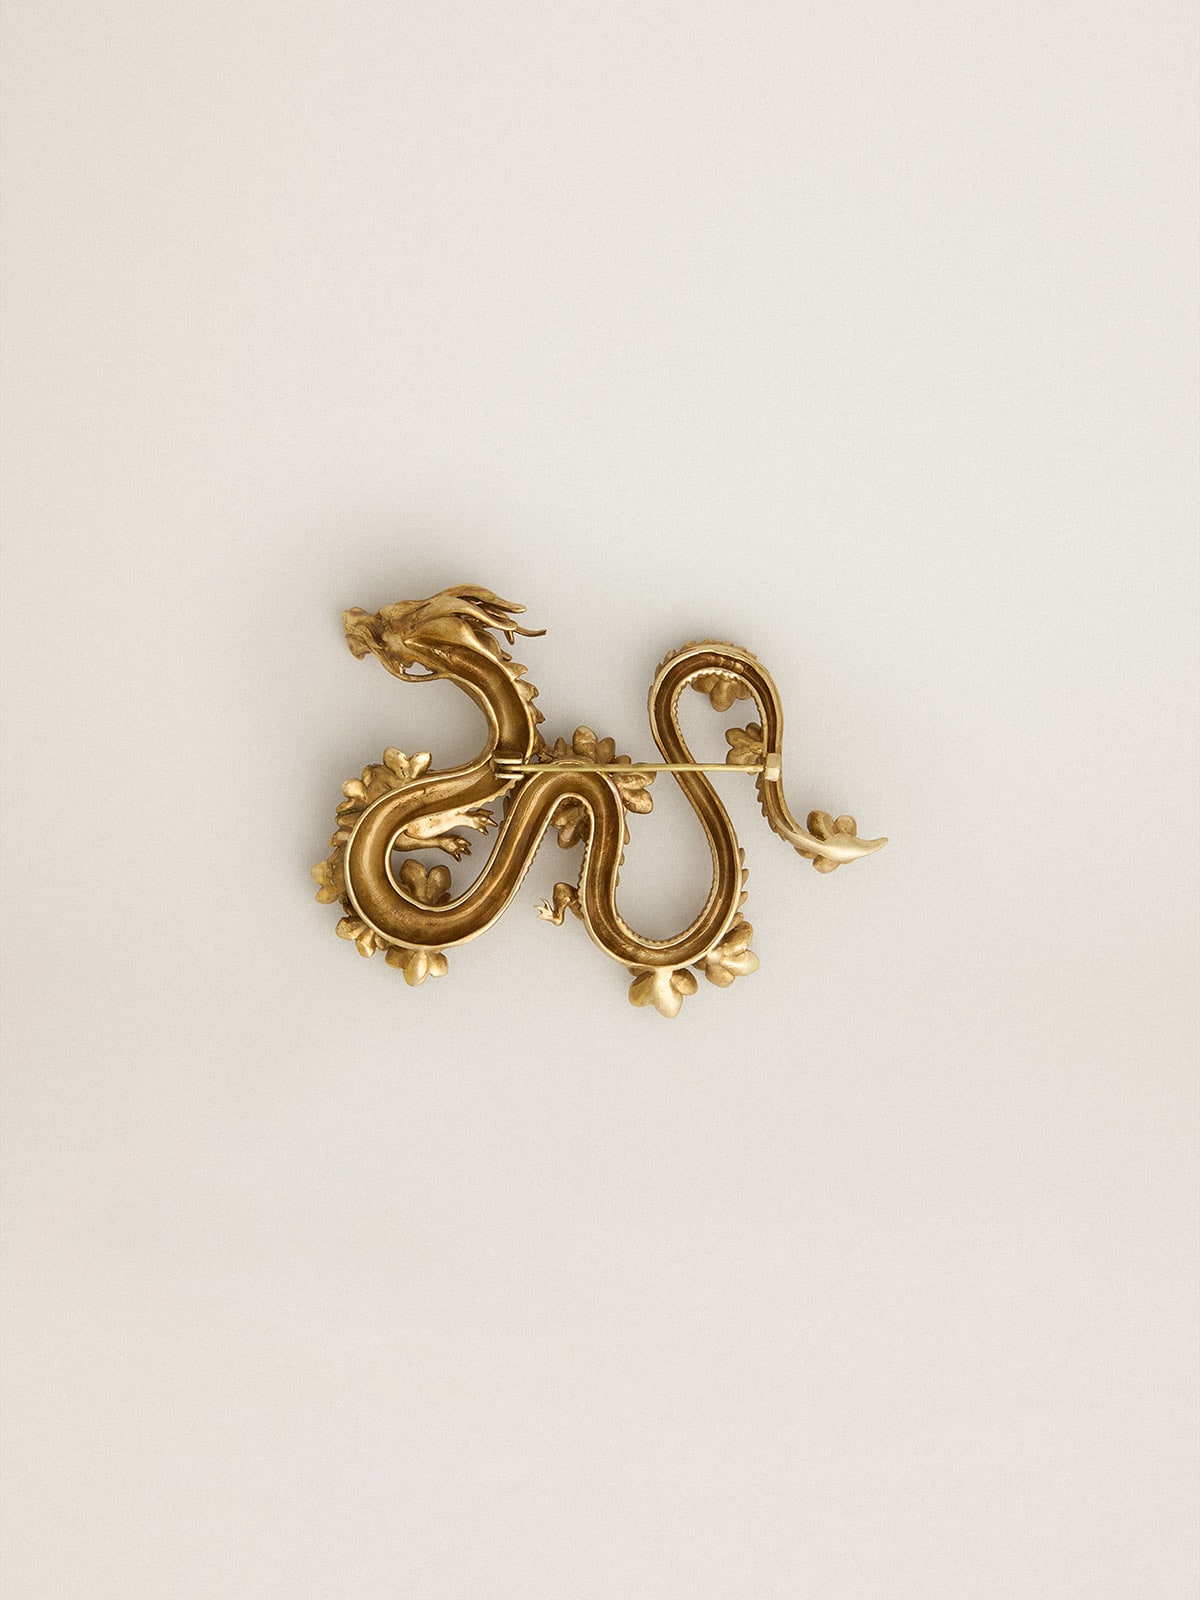 Golden Goose - CNY antique gold dragon-shaped pin in 